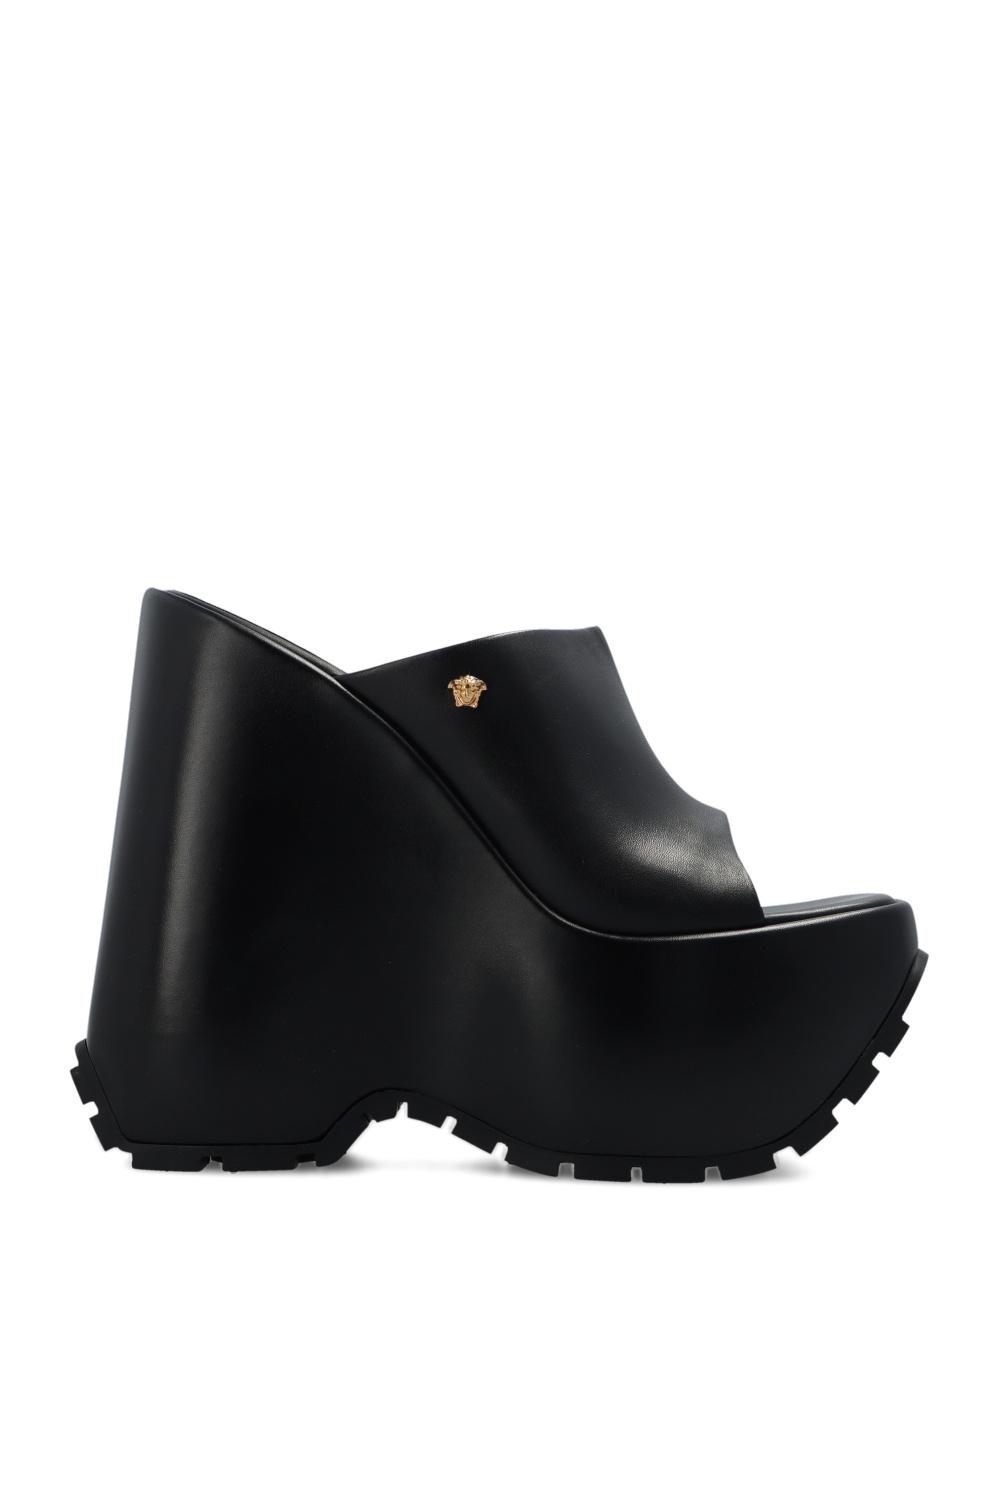 Gianni Versace T 37 Black Leather Mules